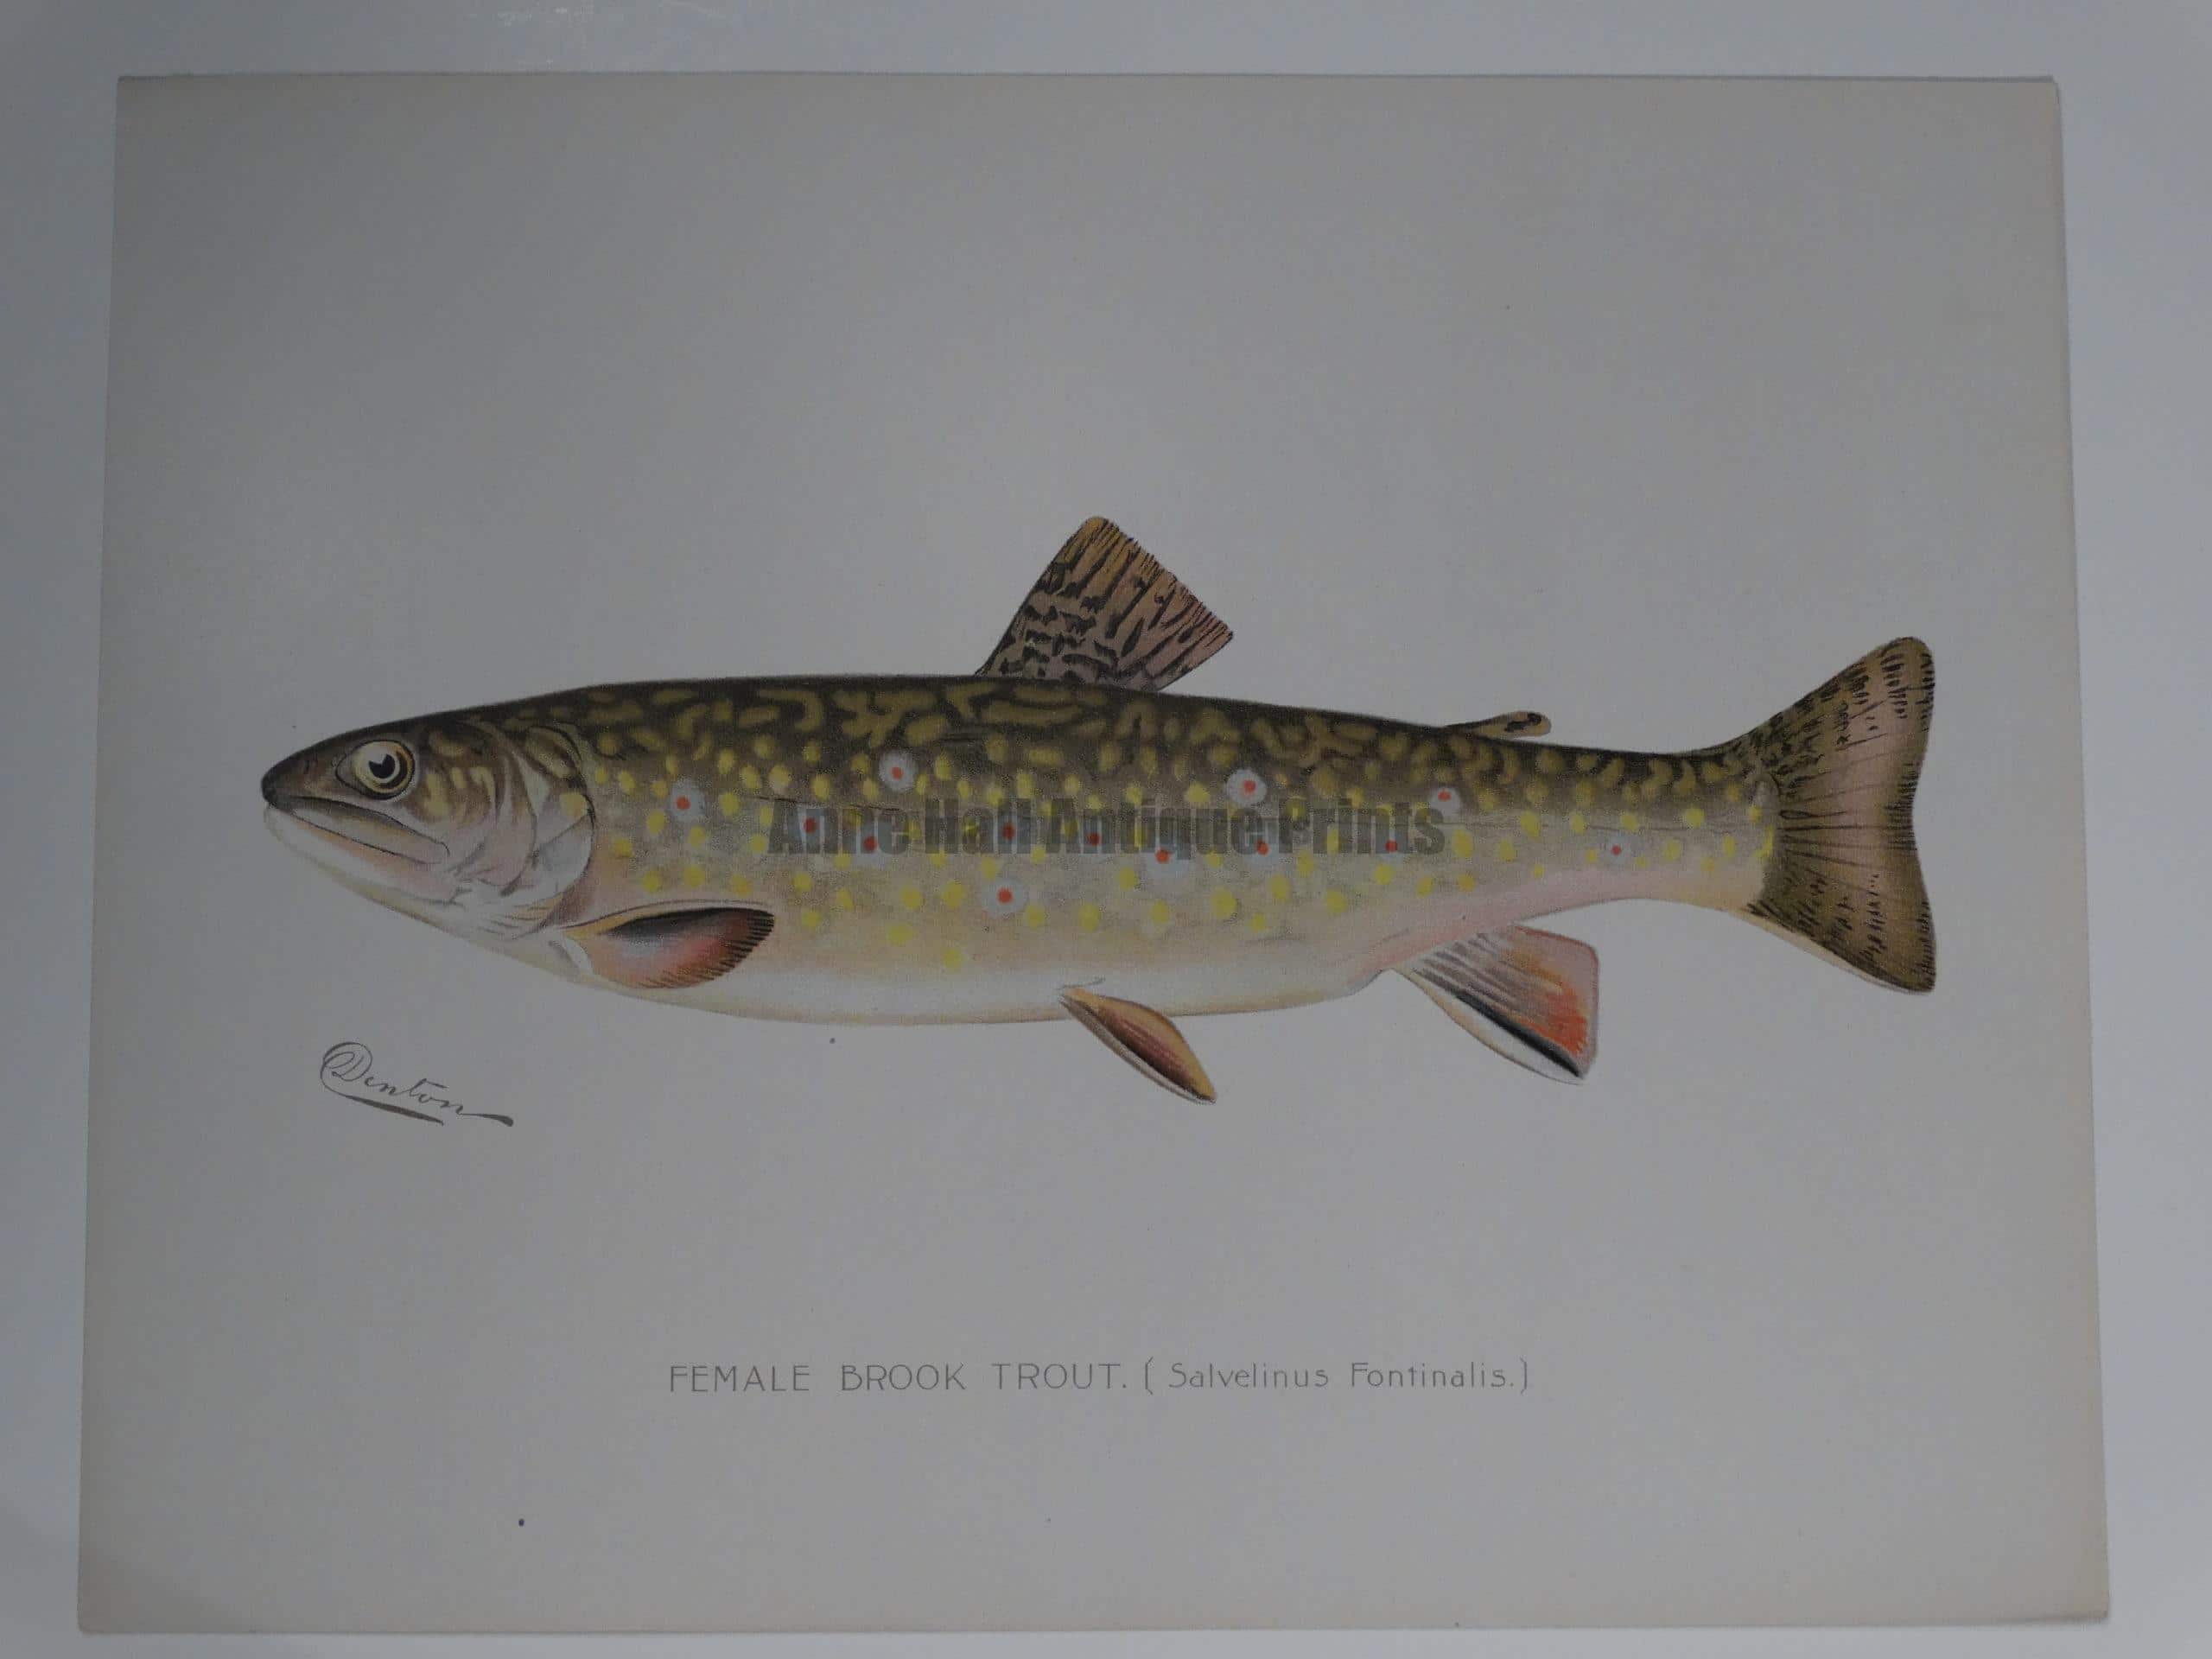 Denton Female Brook Trout: An outstanding portfolio color lithograph published for Sherman Denton, c.1900, as documentation of trout-salmon found in North America.  9 1/2 x 12"  